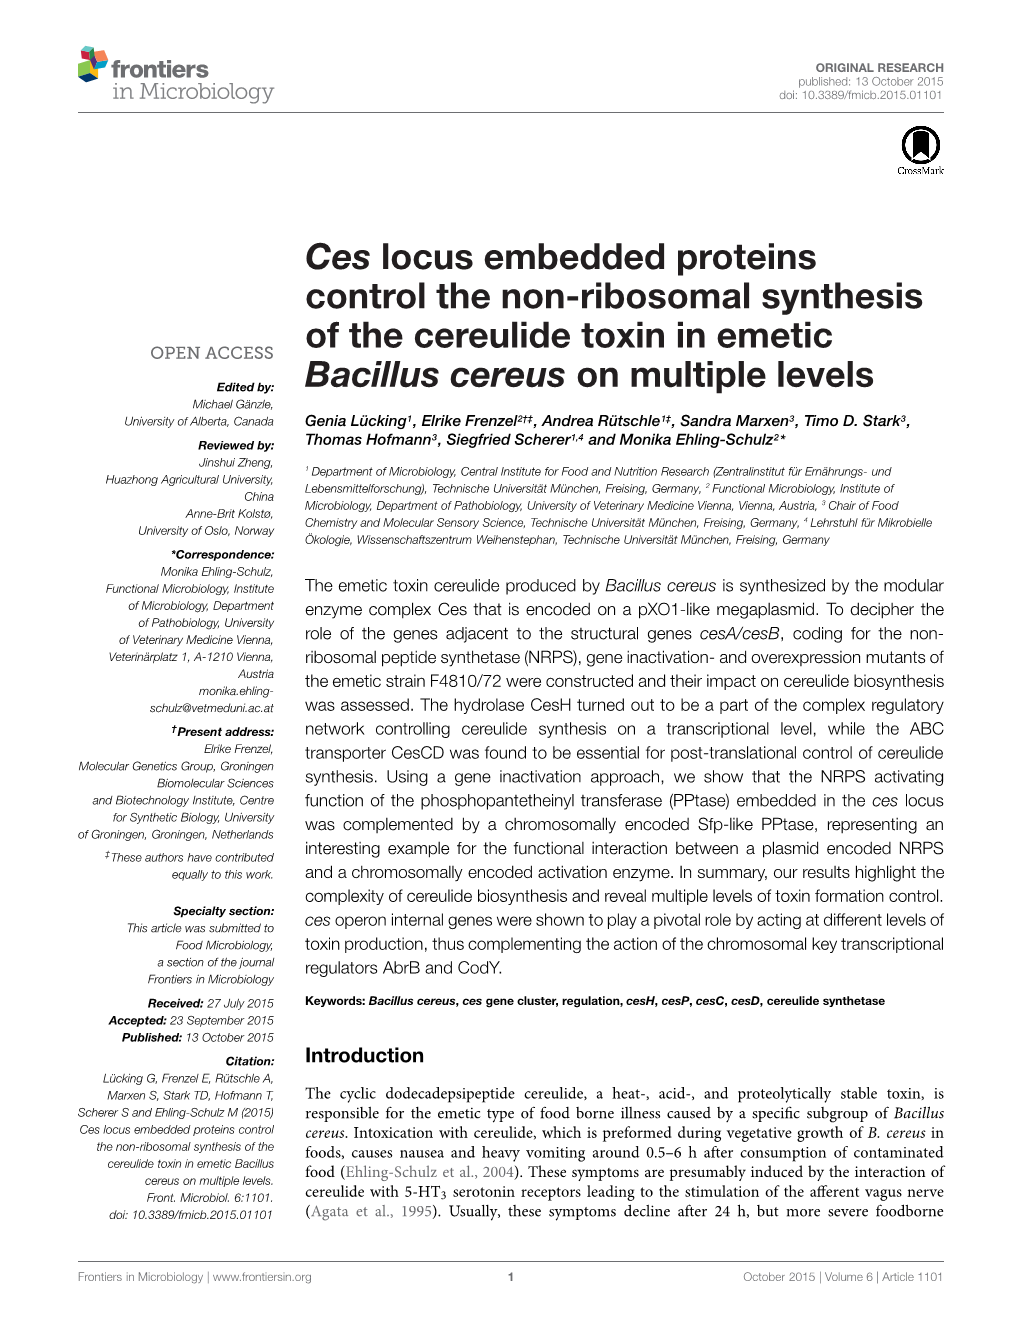 Ces Locus Embedded Proteins Control the Non-Ribosomal Synthesis of the Cereulide Toxin in Emetic